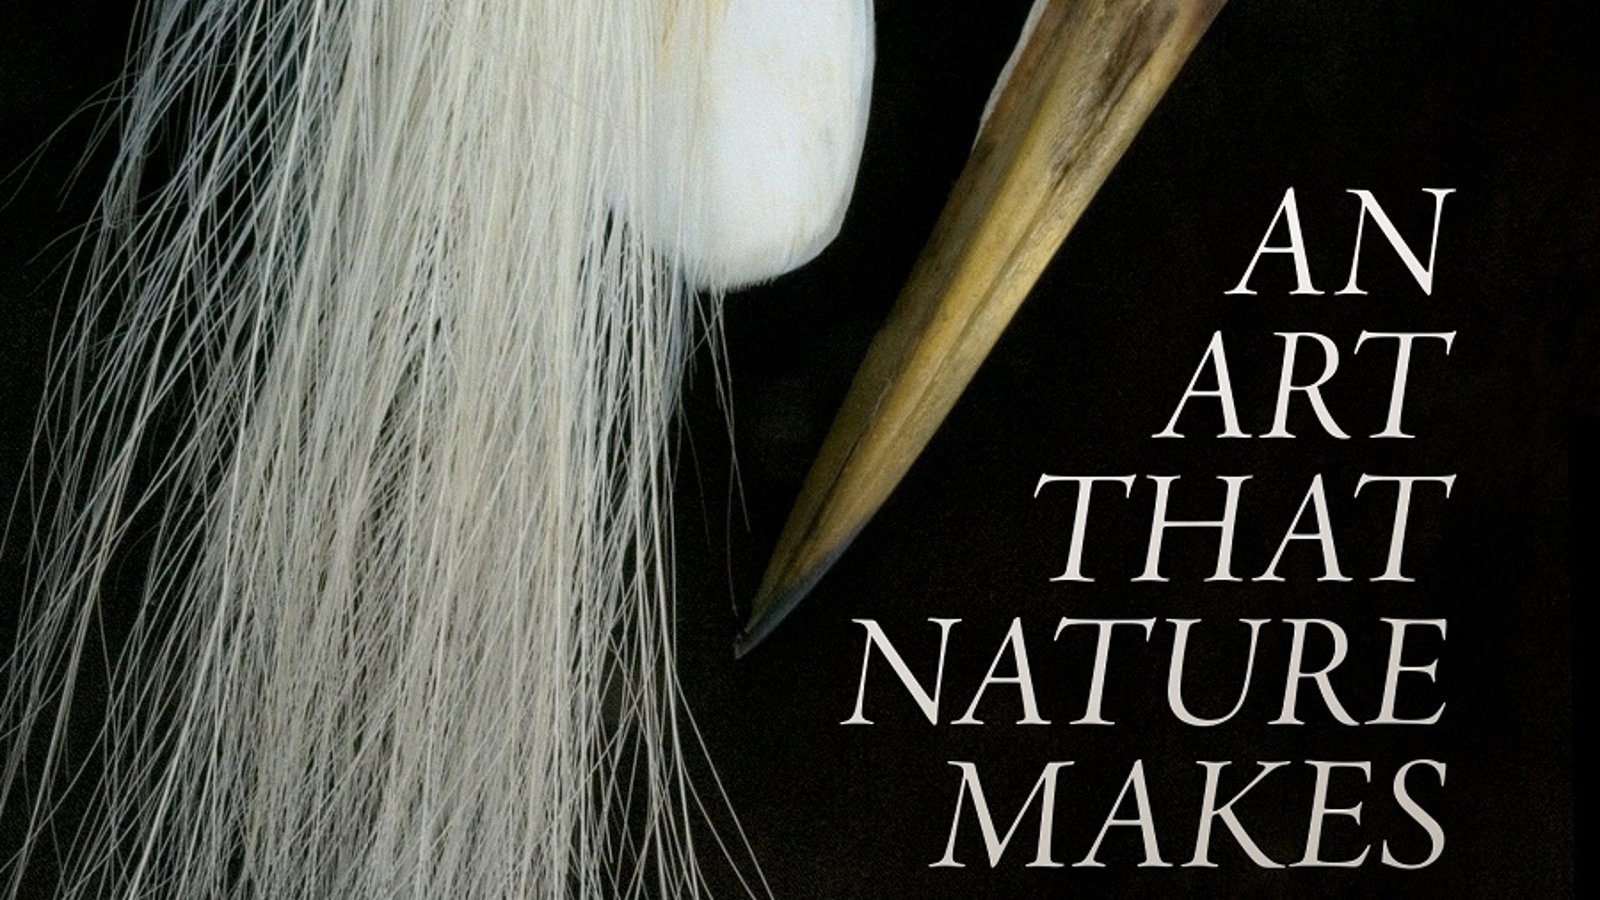 An Art That Nature Makes - The Work of Artist Rosamond Purcell